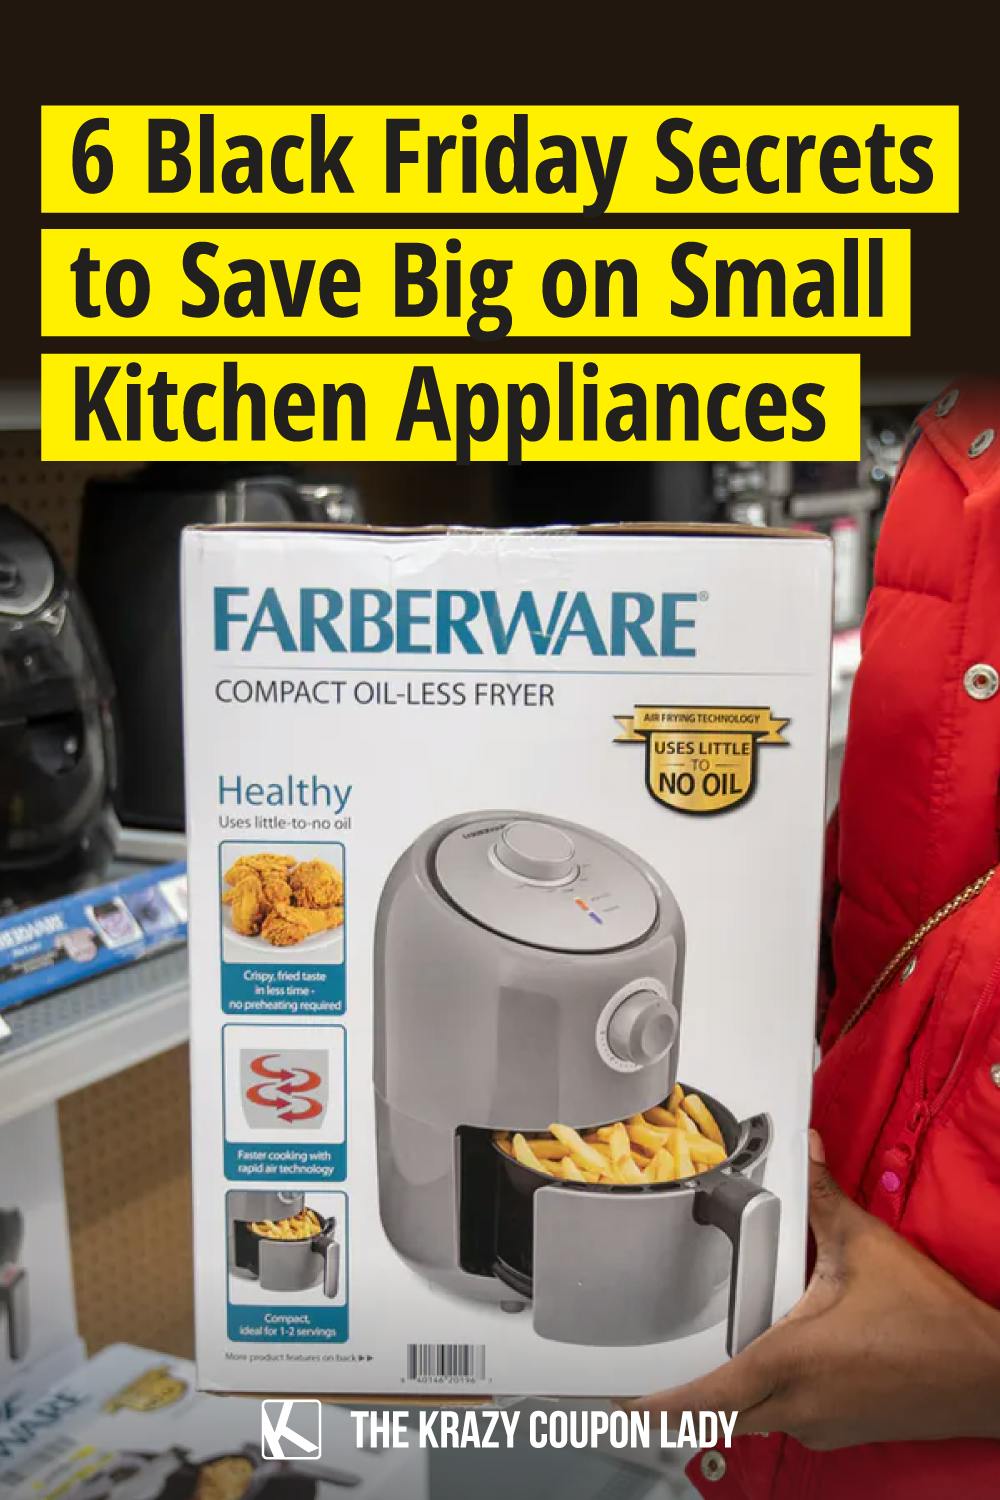 6 Secrets We're Using to Save Big on Small Black Friday Kitchen Appliances